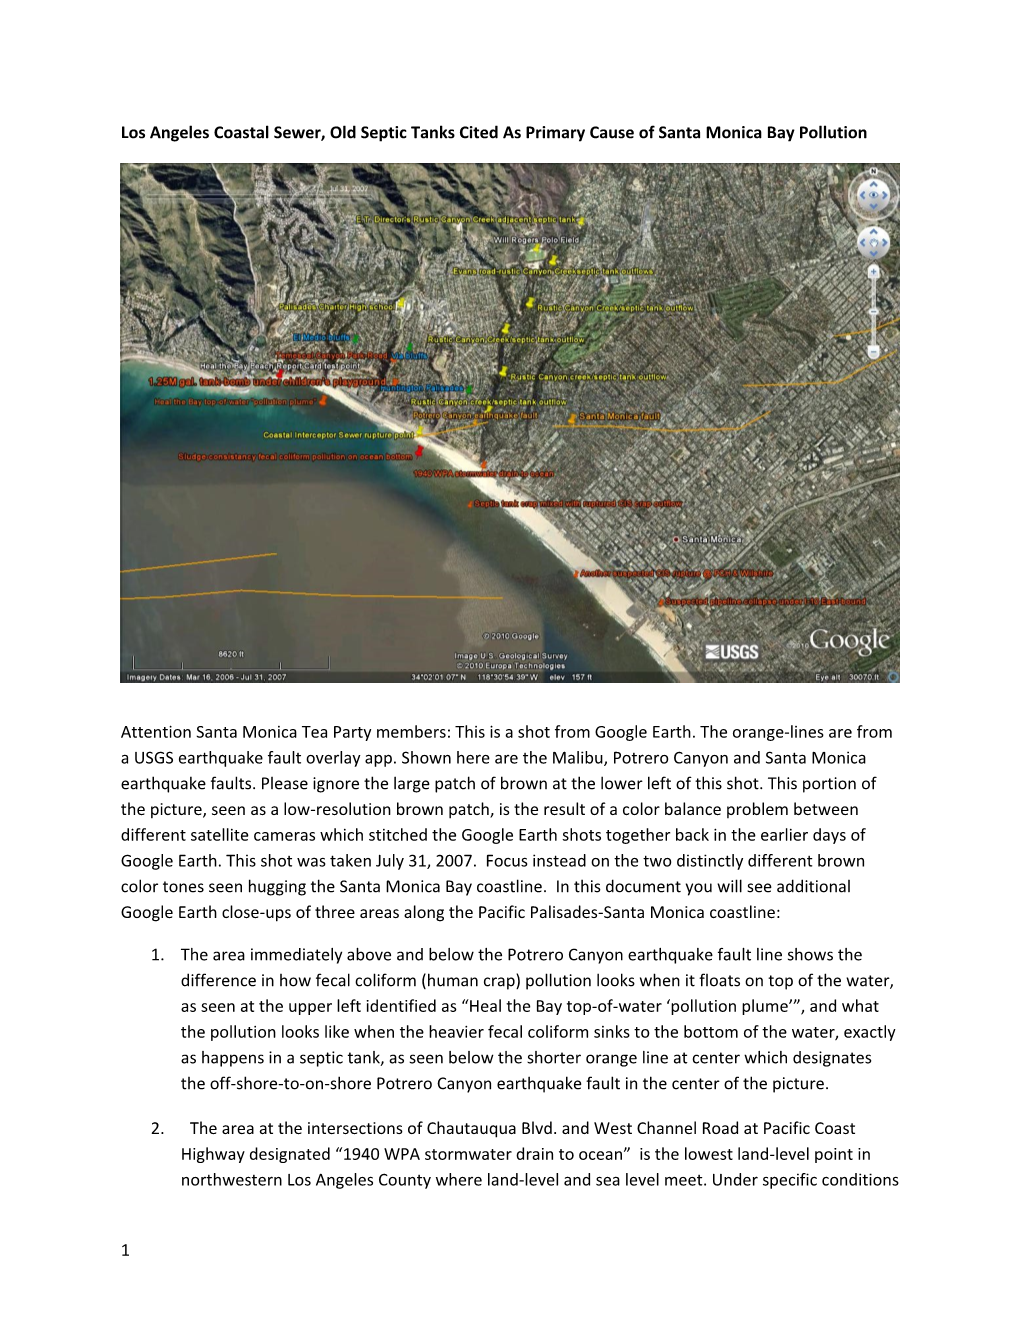 Los Angeles Coastal Sewer, Old Septic Tanks Cited As Primary Cause of Santa Monica Bay